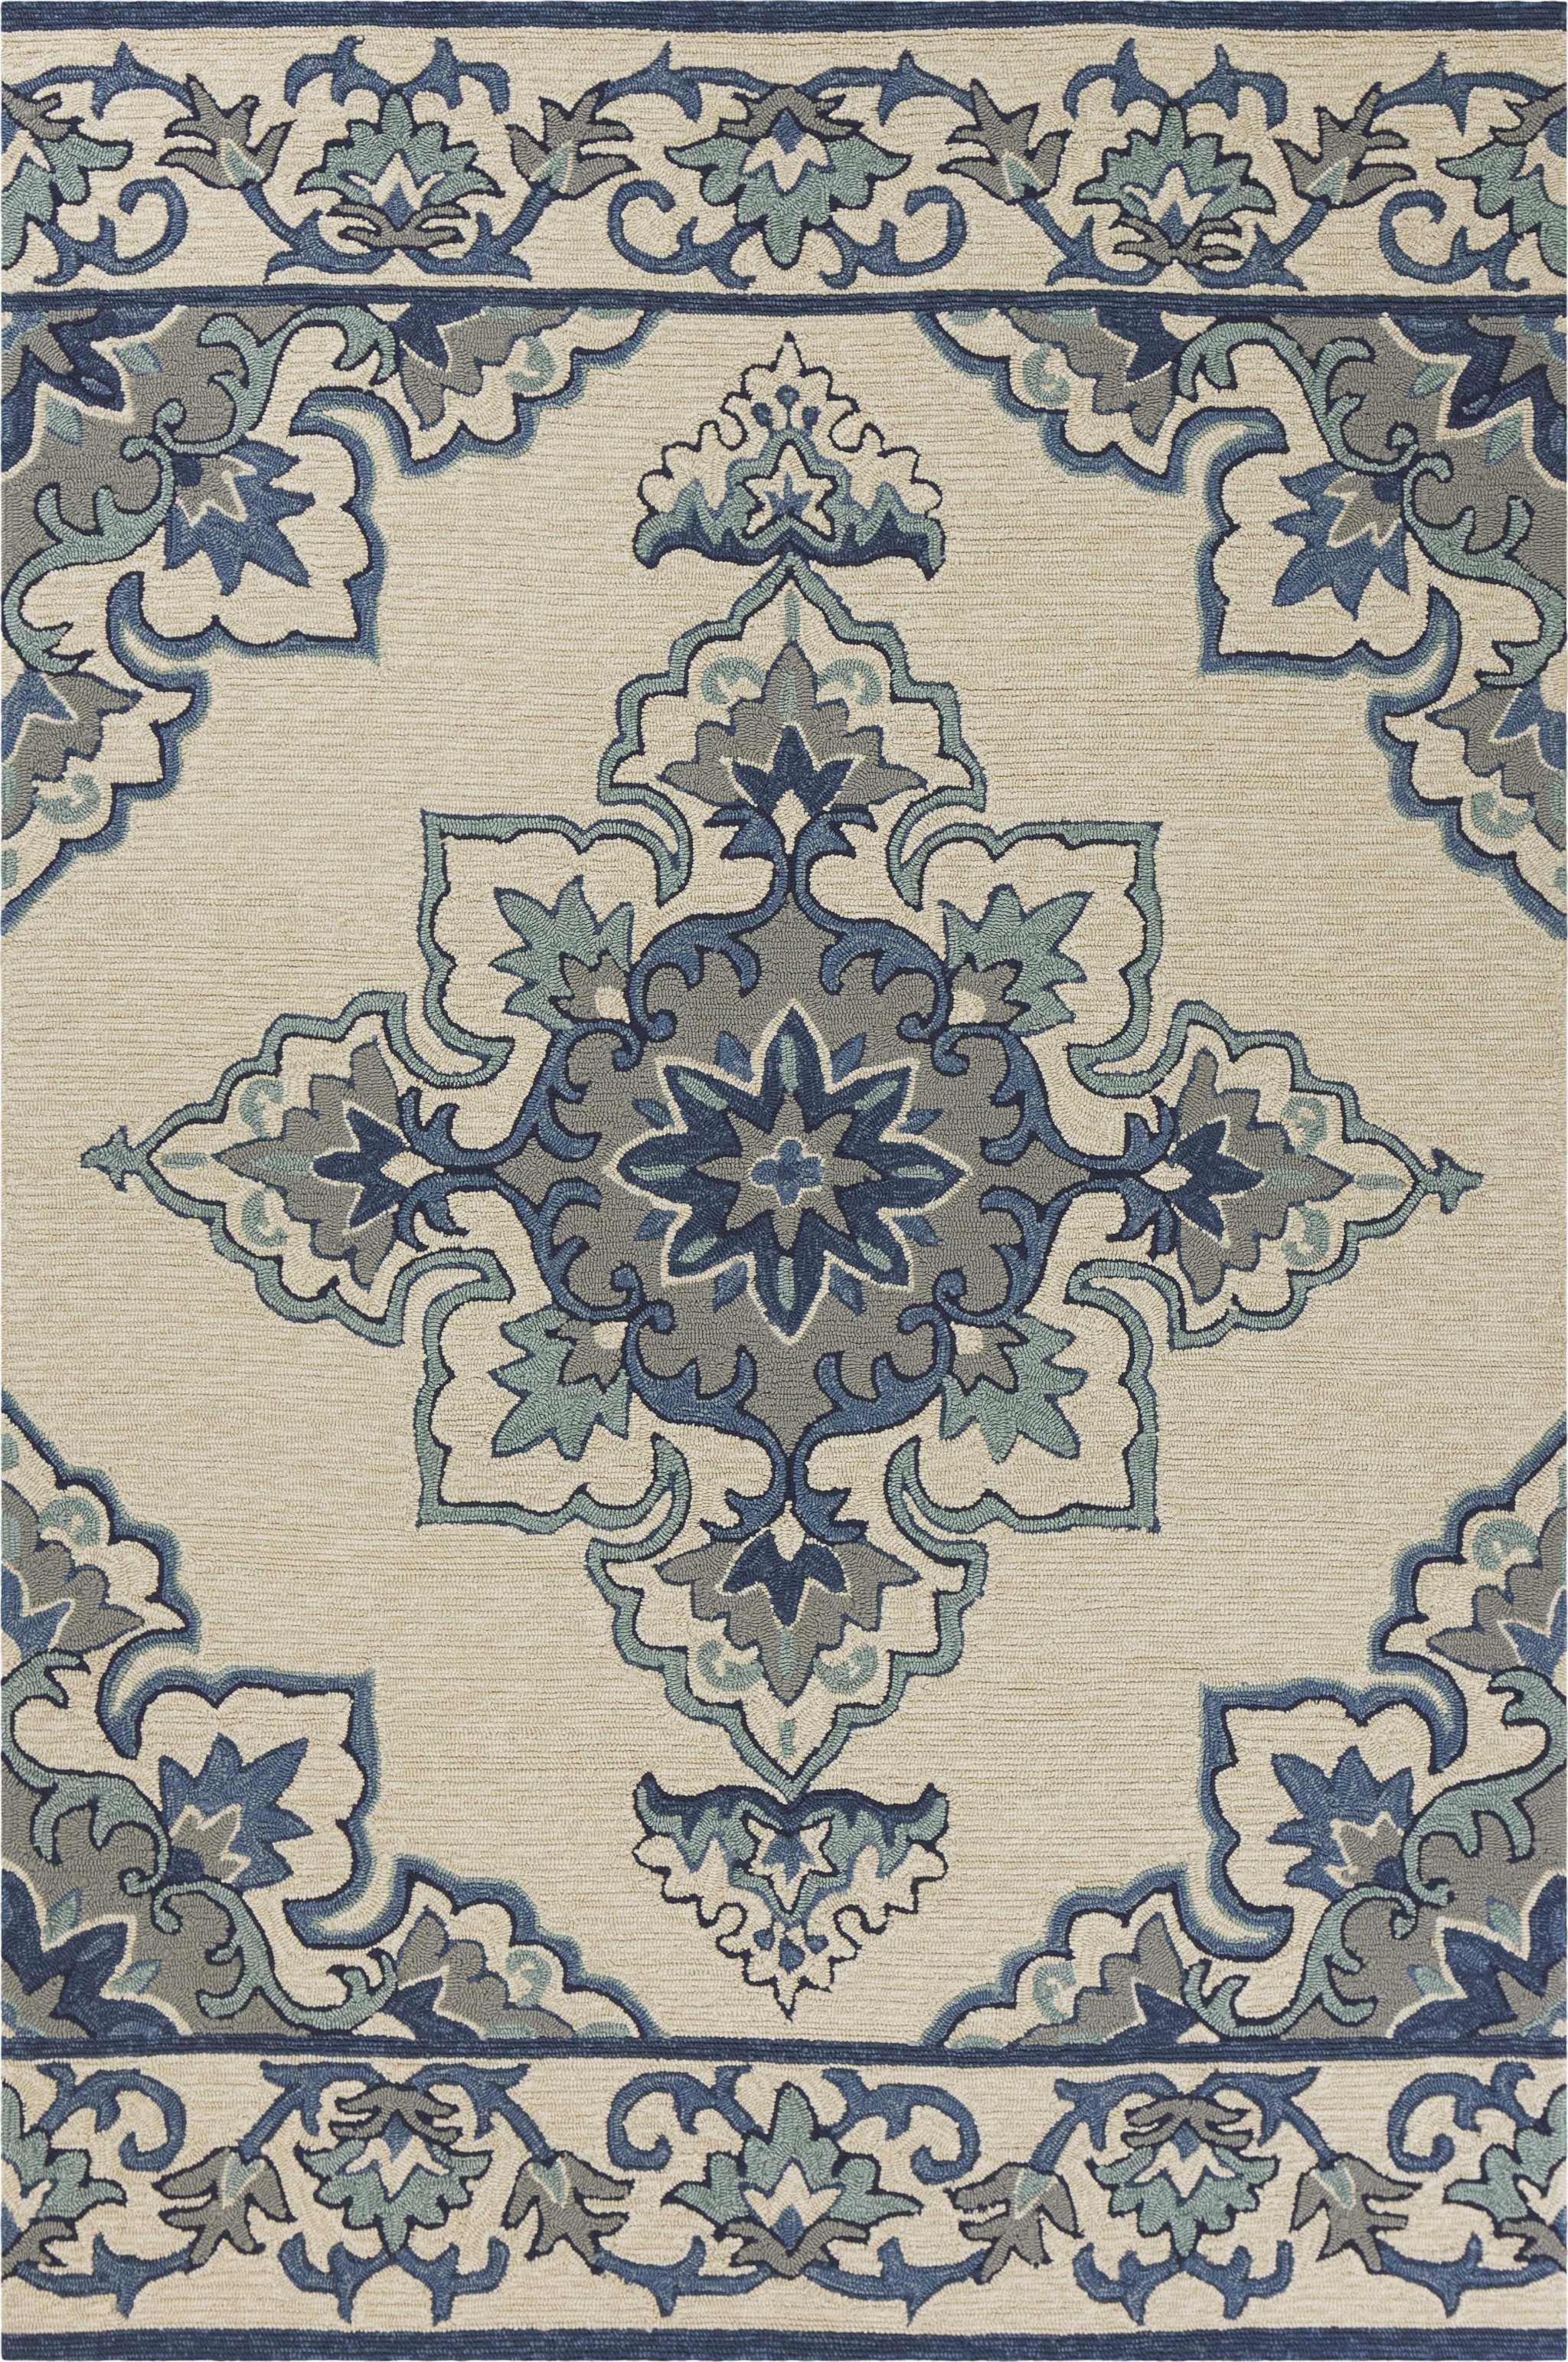 2'X3' Ivory Blue Hand Hooked Floral Medallion Indoor Outdoor Accent Rug-353307-1